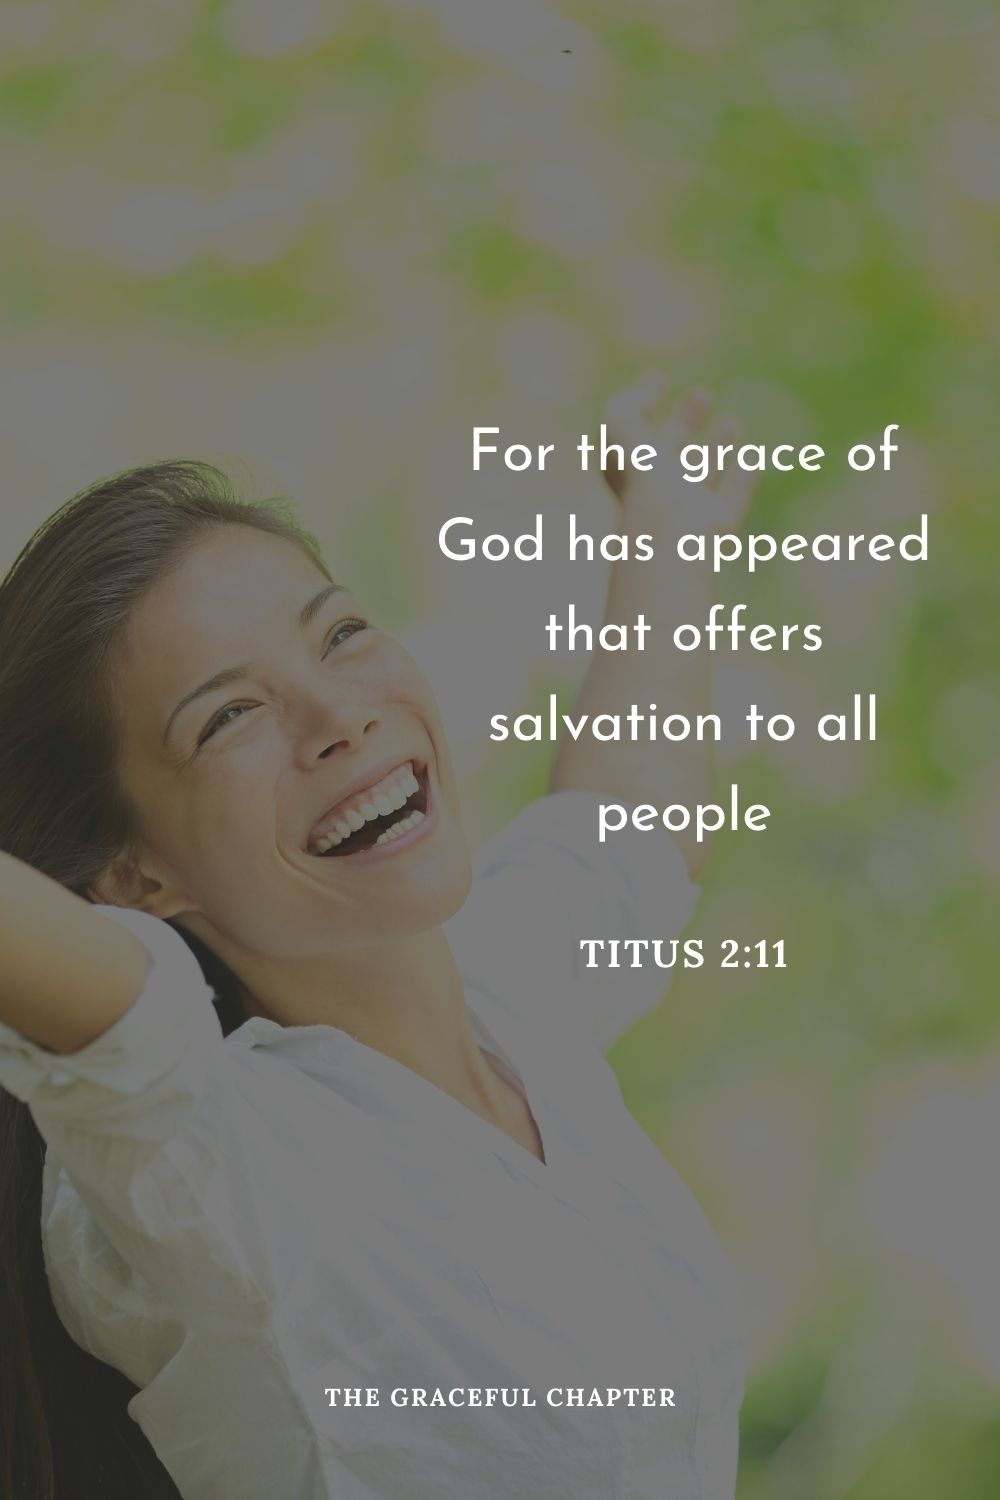 For the grace of God has appeared that offers salvation to all people